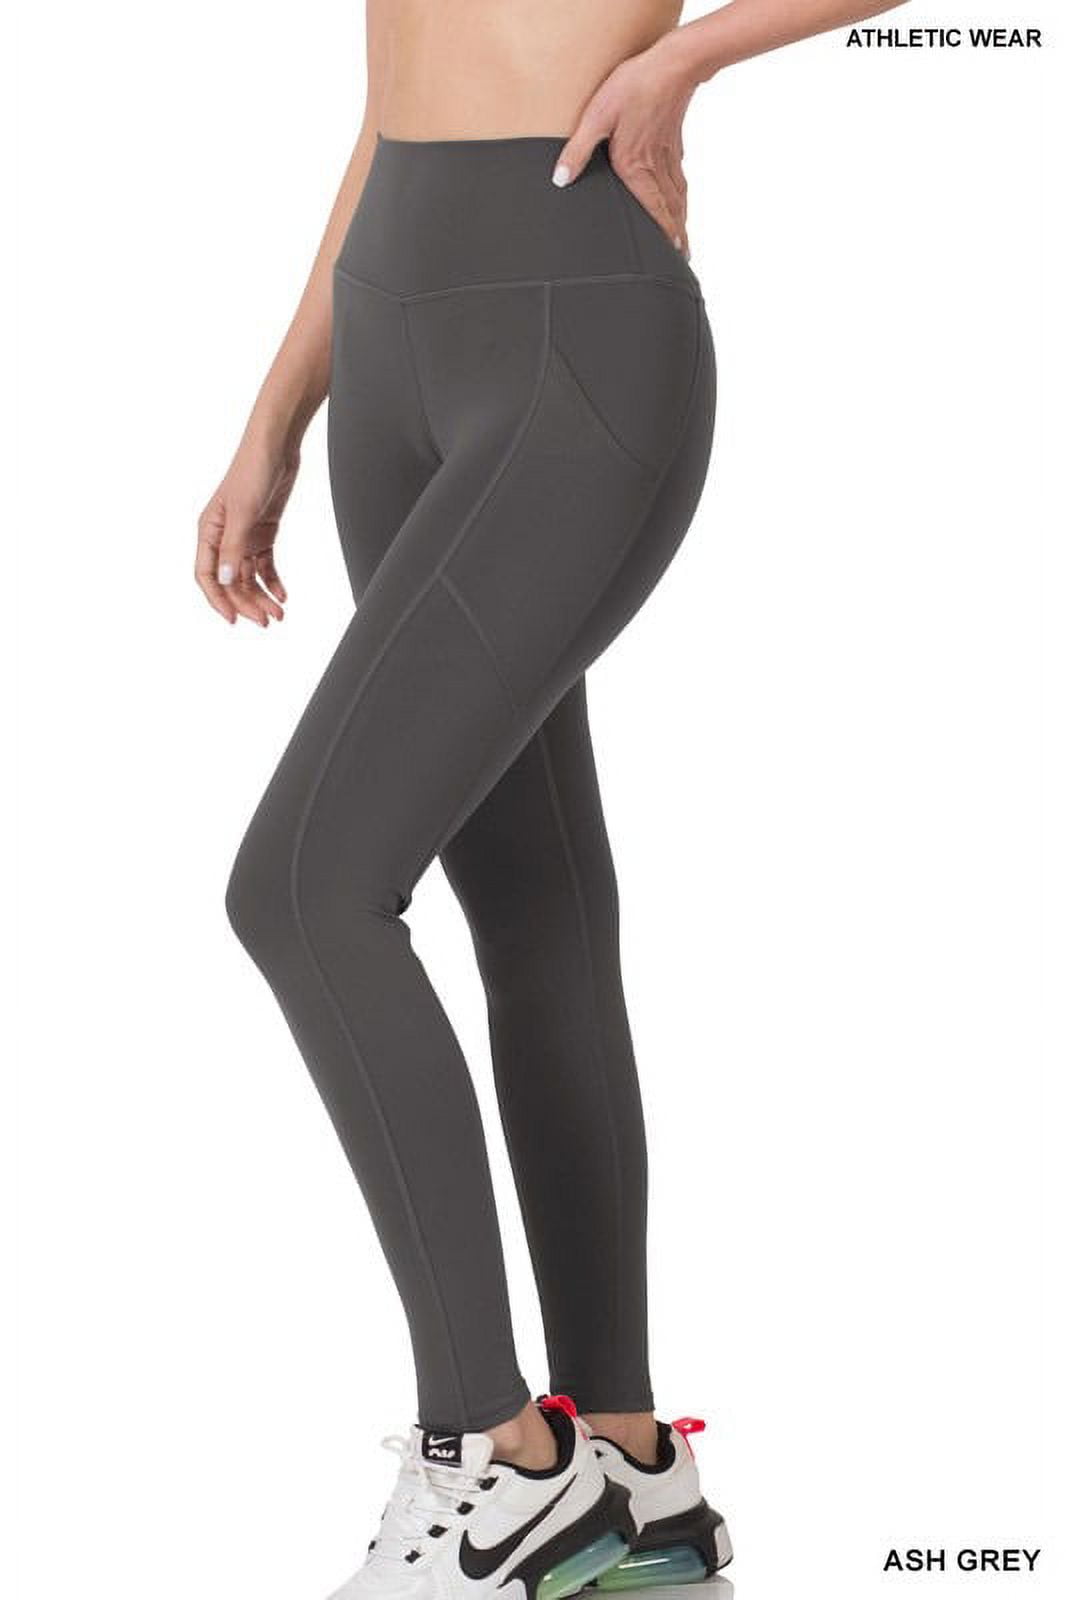 Slimming Athletic Leggings With Pockets, Women's Yoga Pants, Non See  Through, Gray, Size Small 